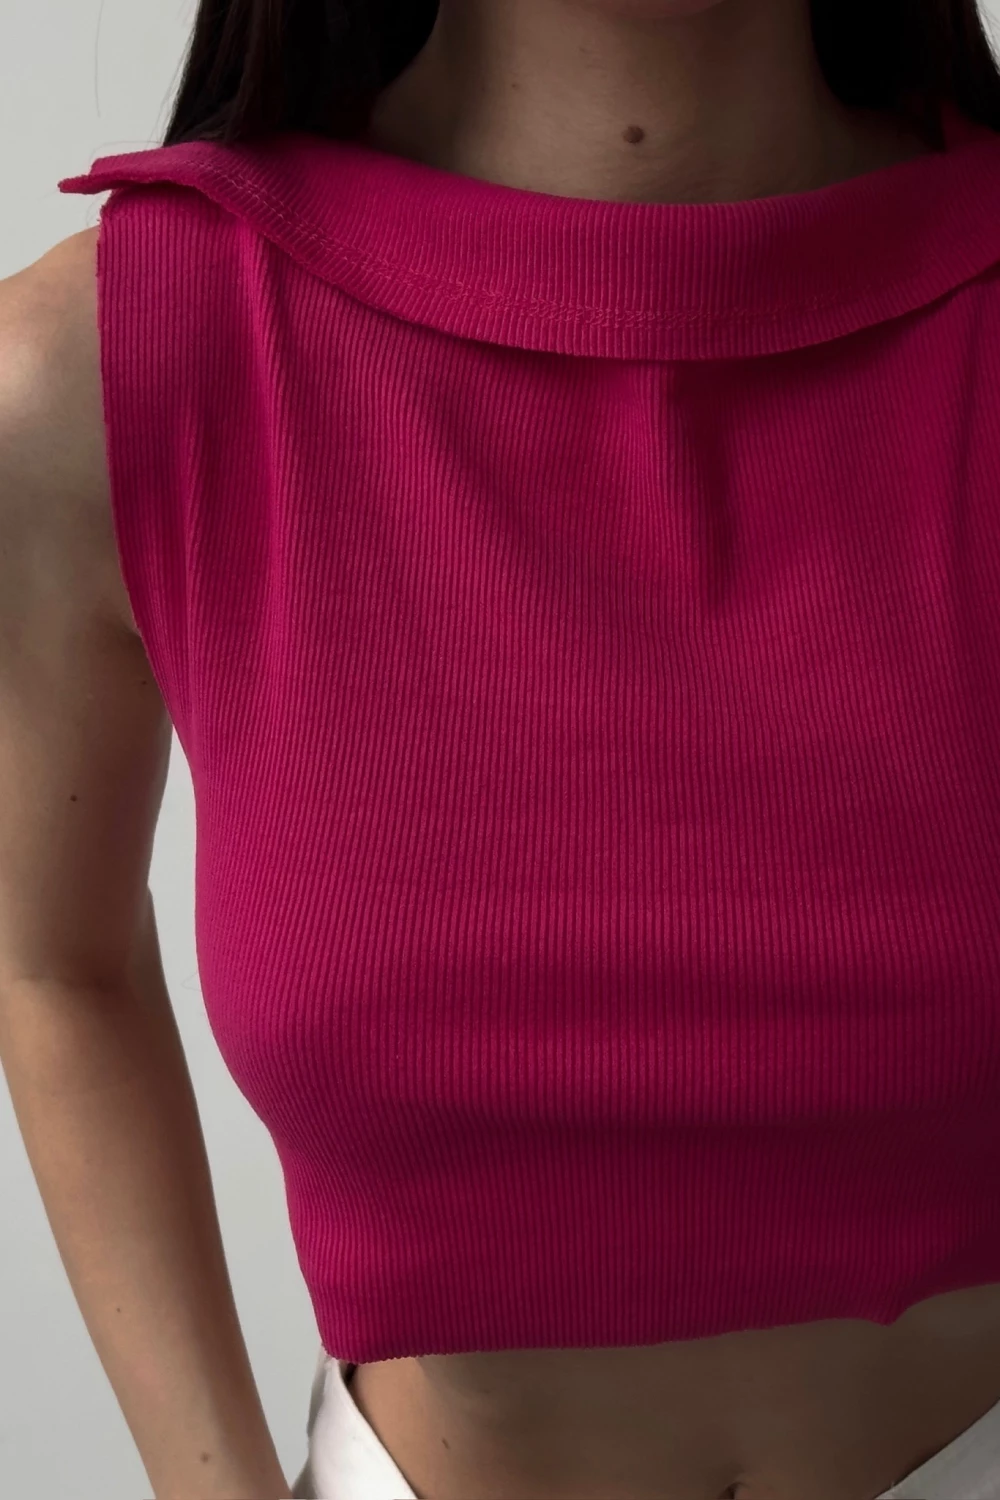 rough ribbed top in fuchsia color